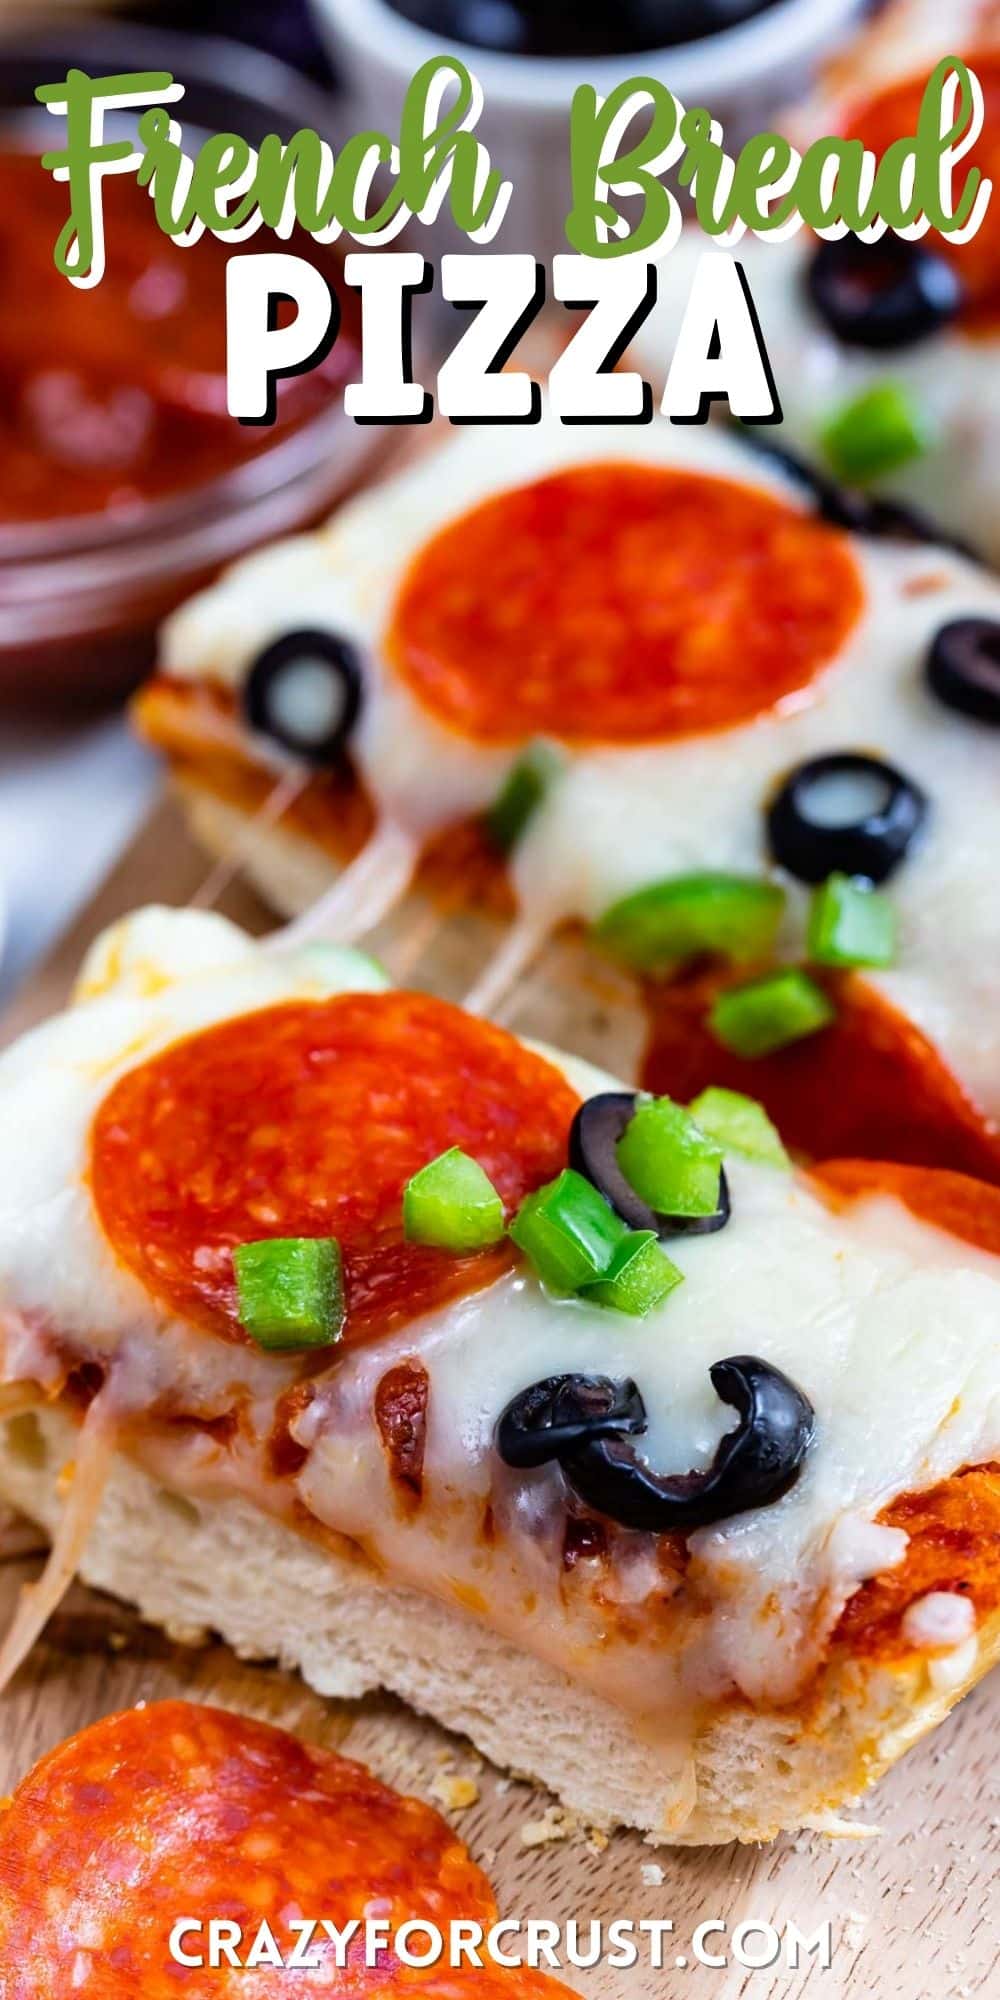 sliced pizza with pepperoni and olives on top and words on the image